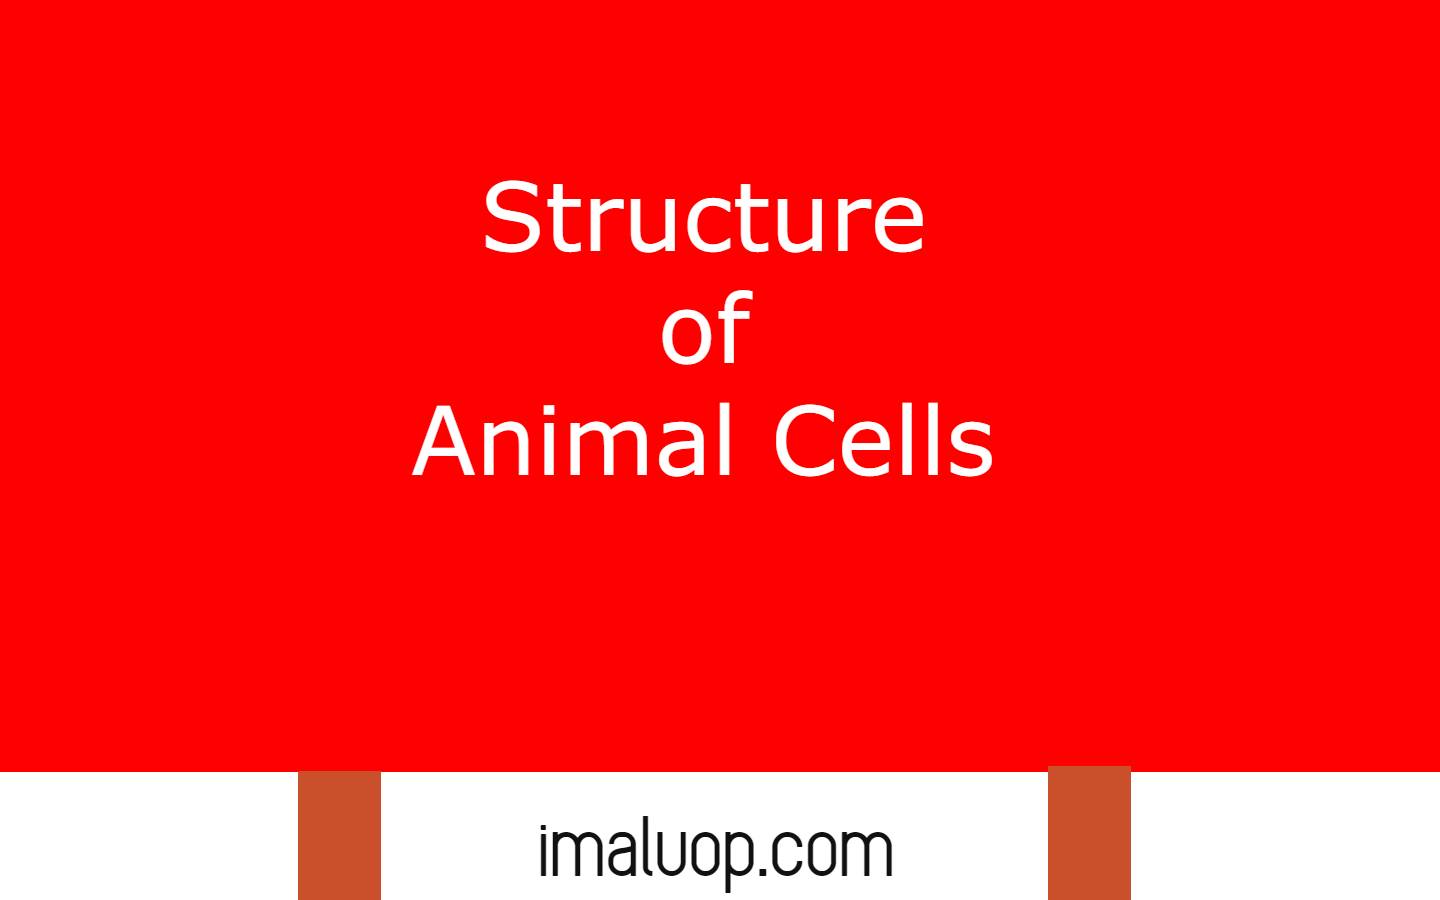 Structure of Animal Cells